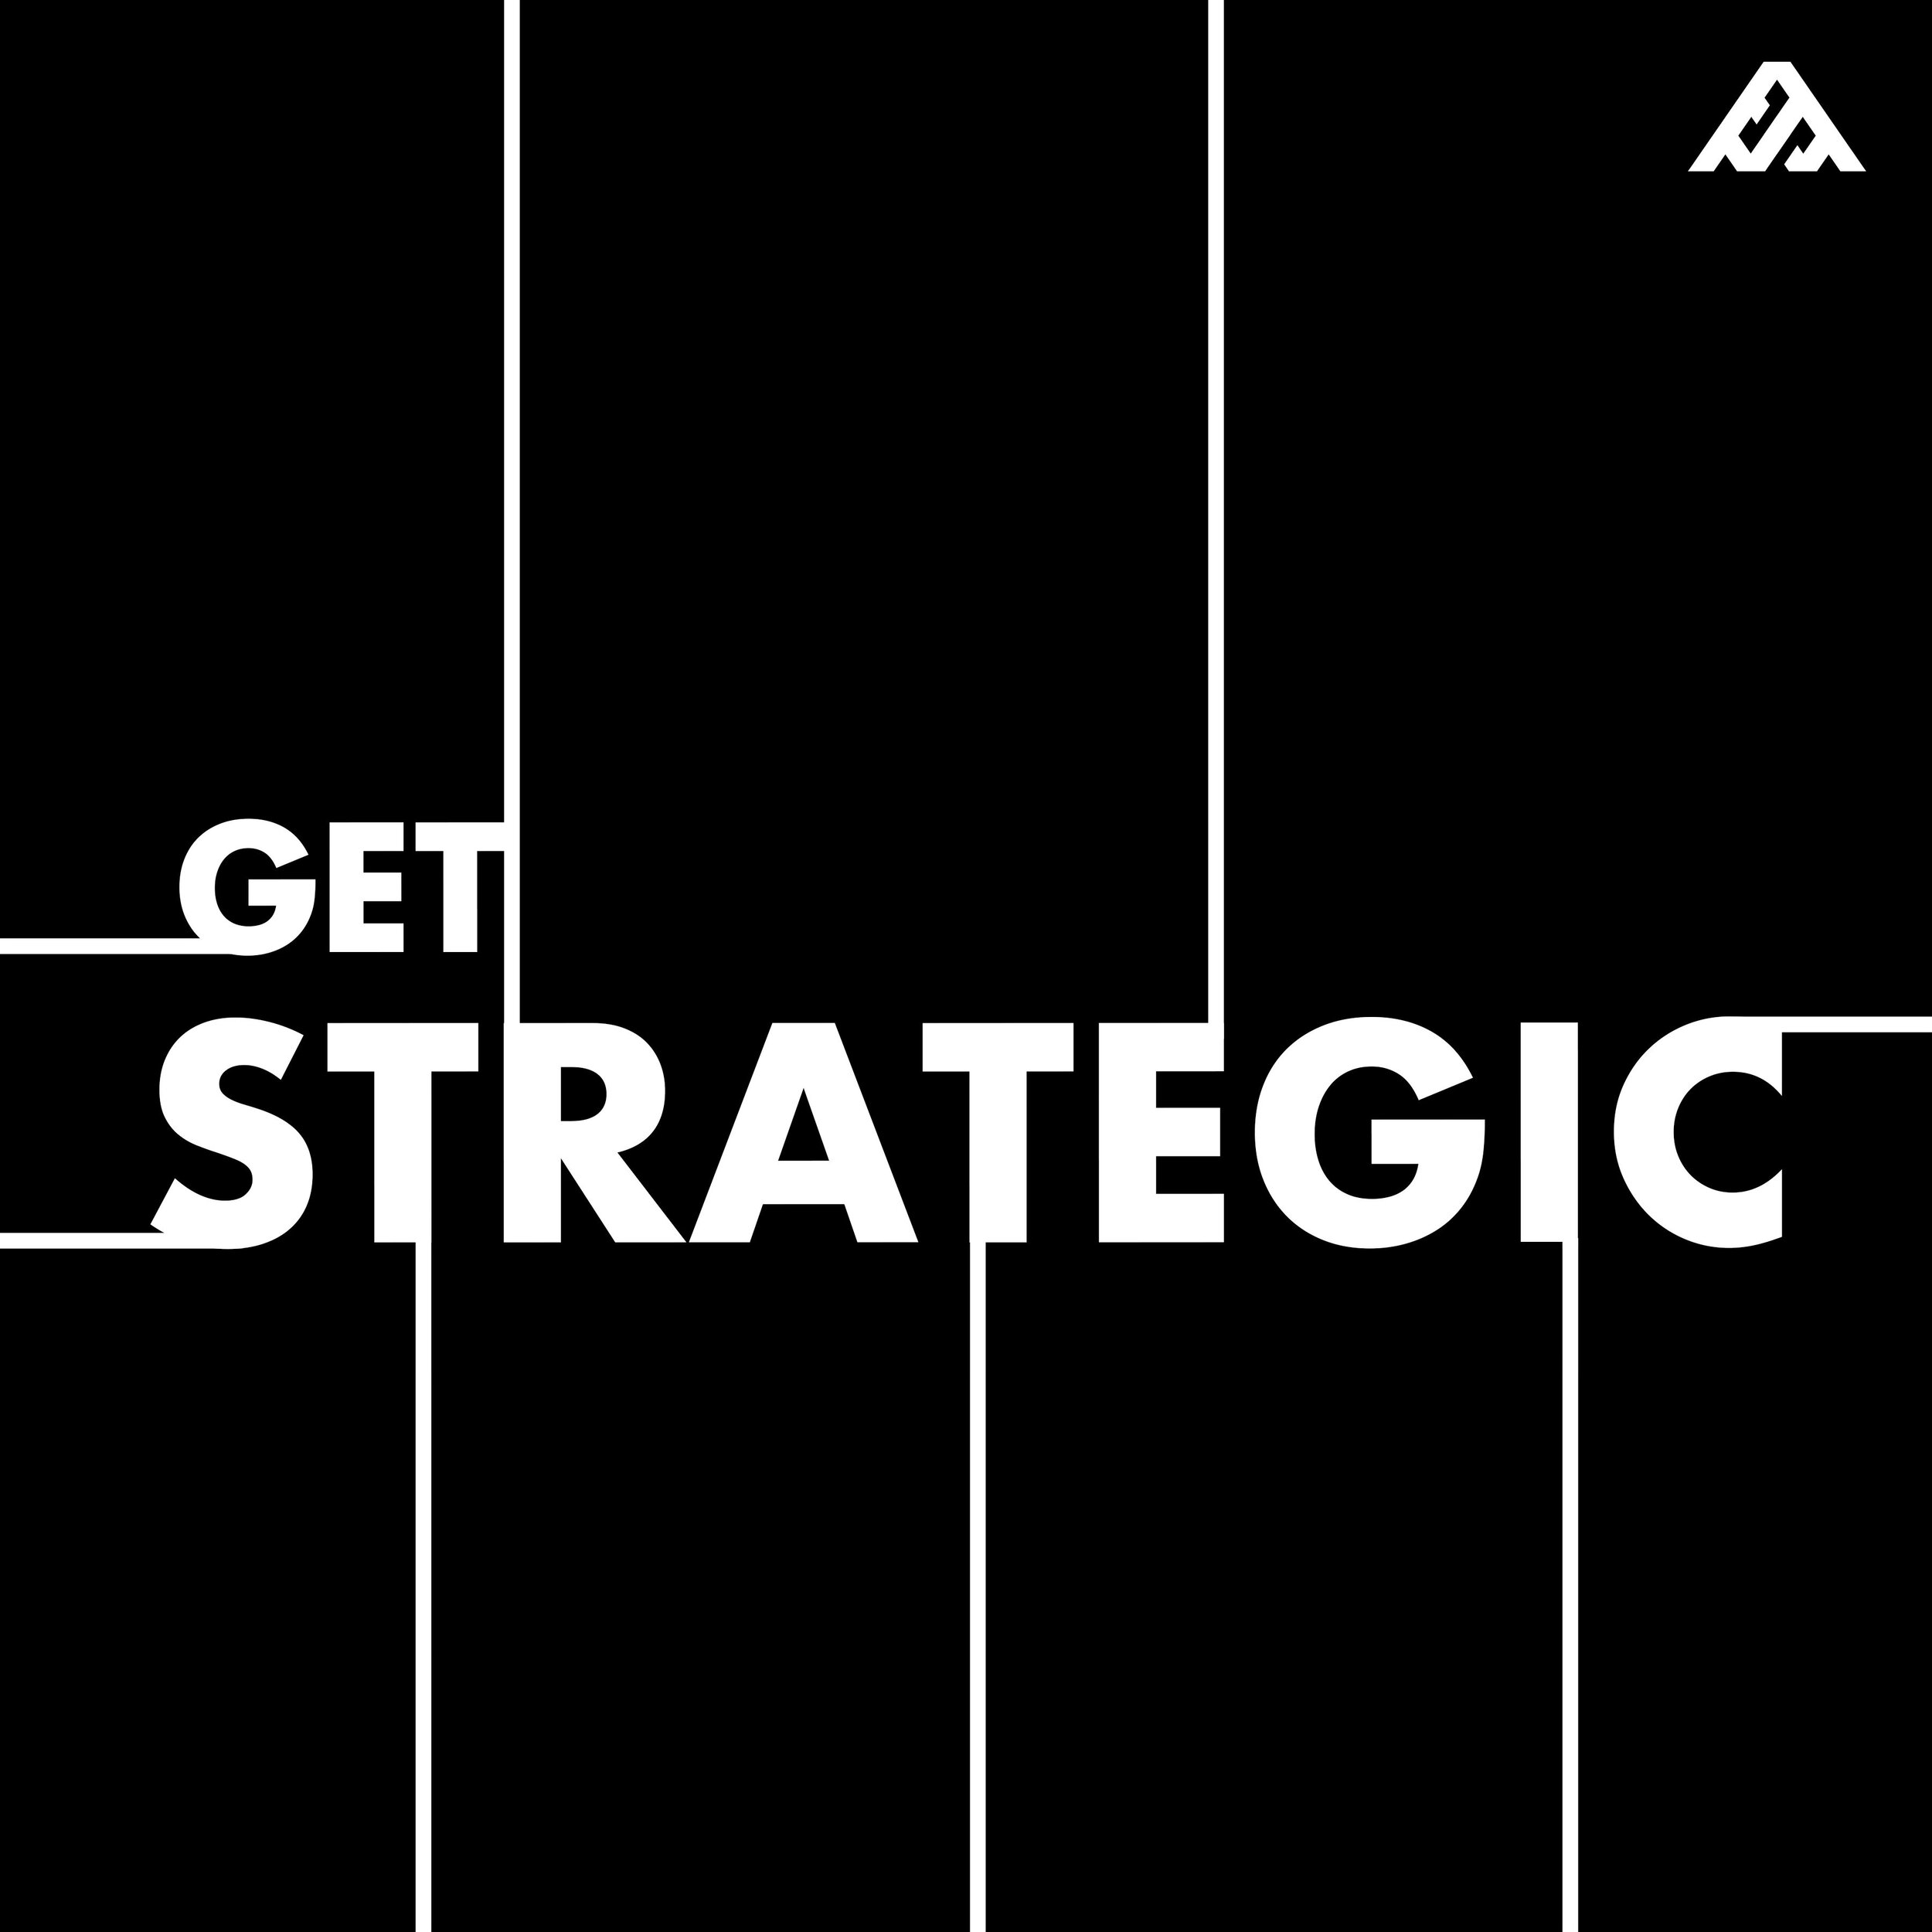 Without a clear strategy, it's easy for your business to feel lost. All Things Branding offers insights and expertise to help guide your brand. 
 
www.allthingsbranding.com

#MarketingMastery
#WebsiteDesign
#ProfessionalPhotography
#LogoDesign
#Graph